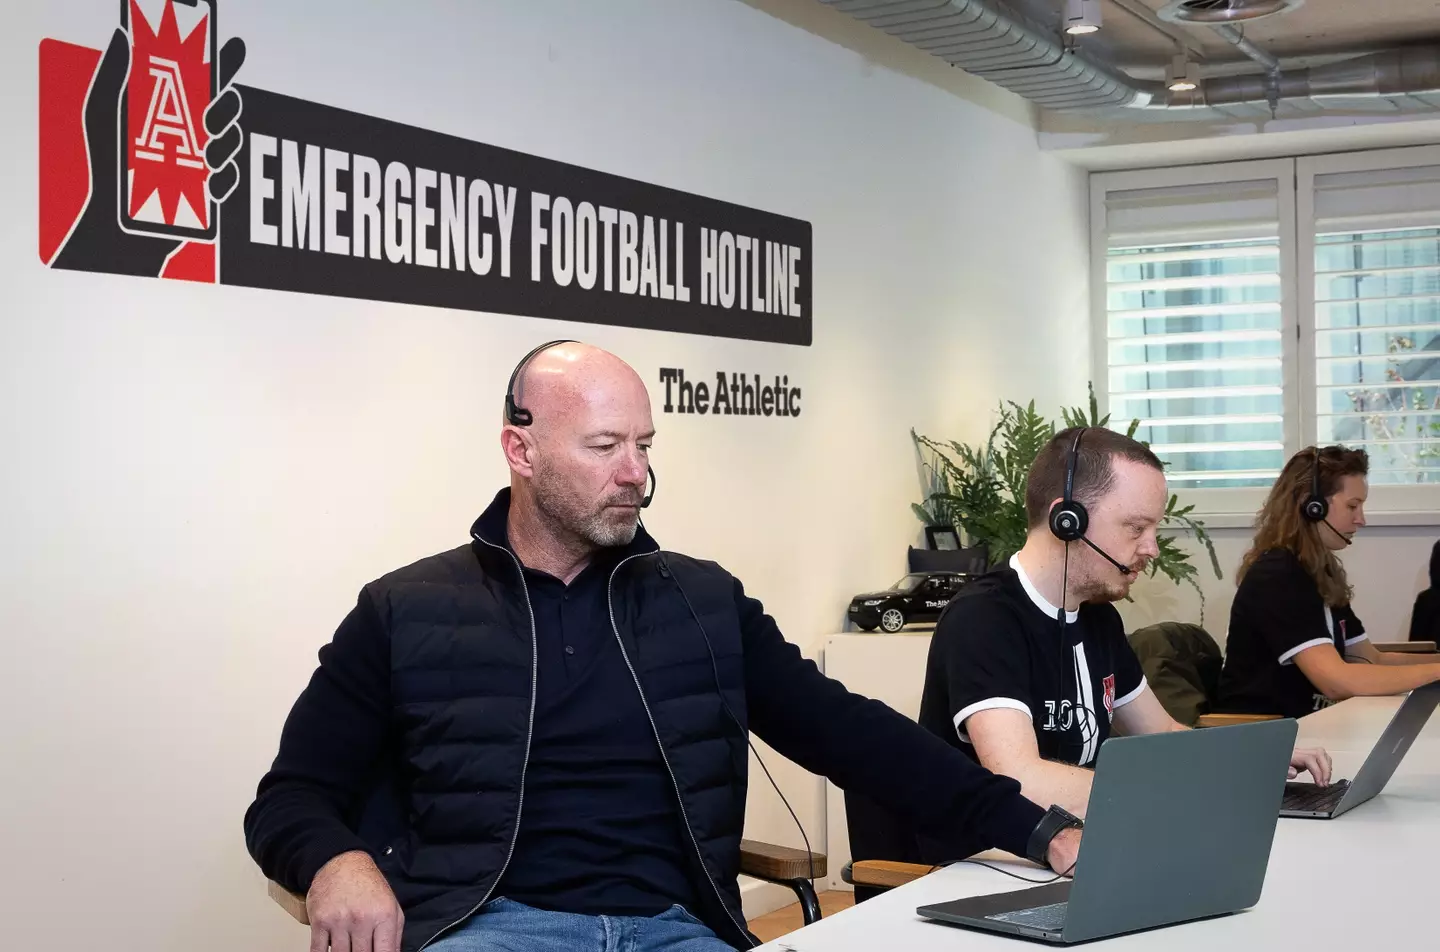 Shearer is part of The Athletic's 'Emergency Football Hotline'. (